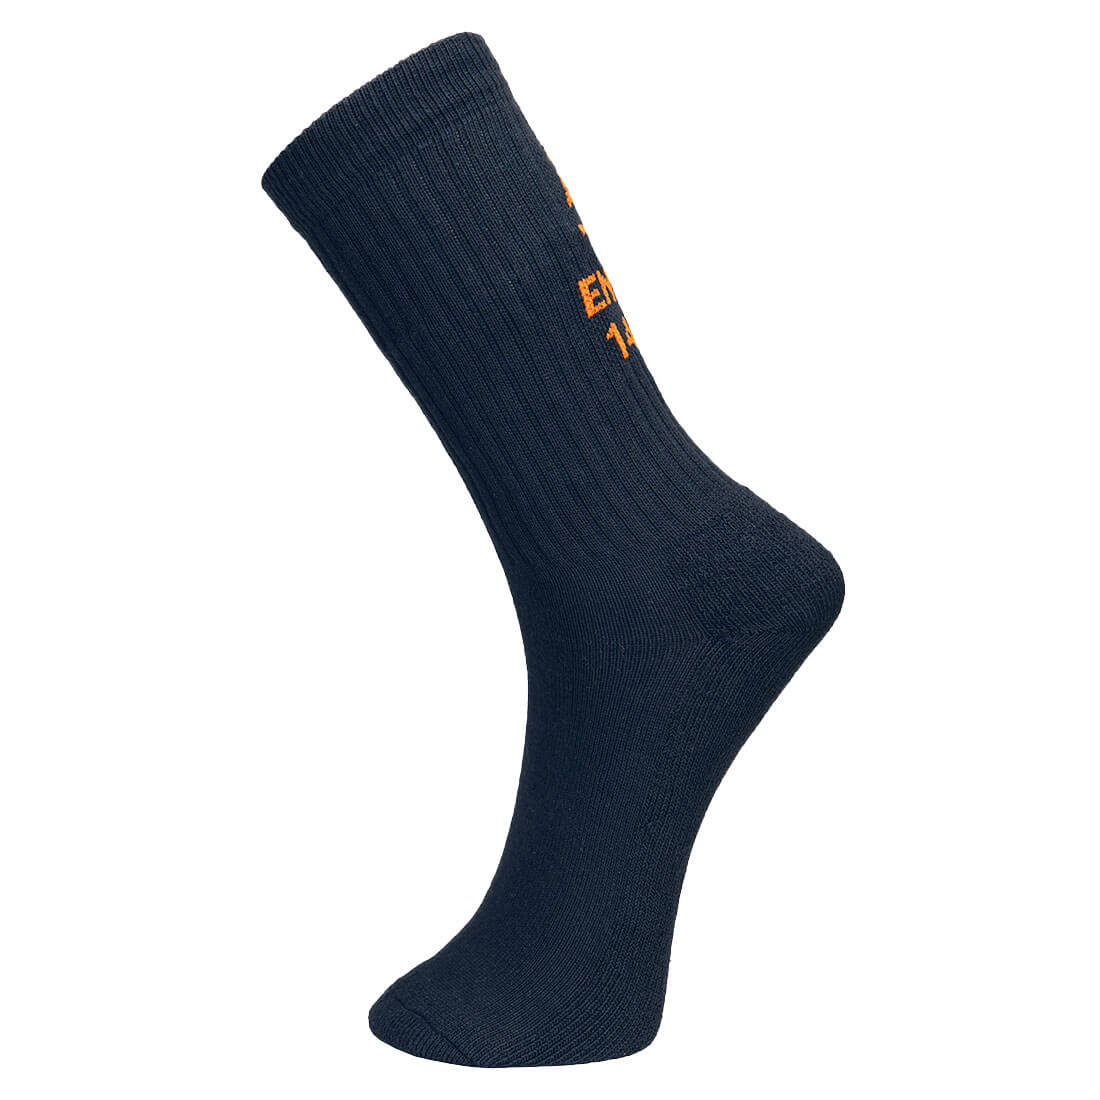 Modaflame Work Sock SK22 Navy Size 39-43 Fit R